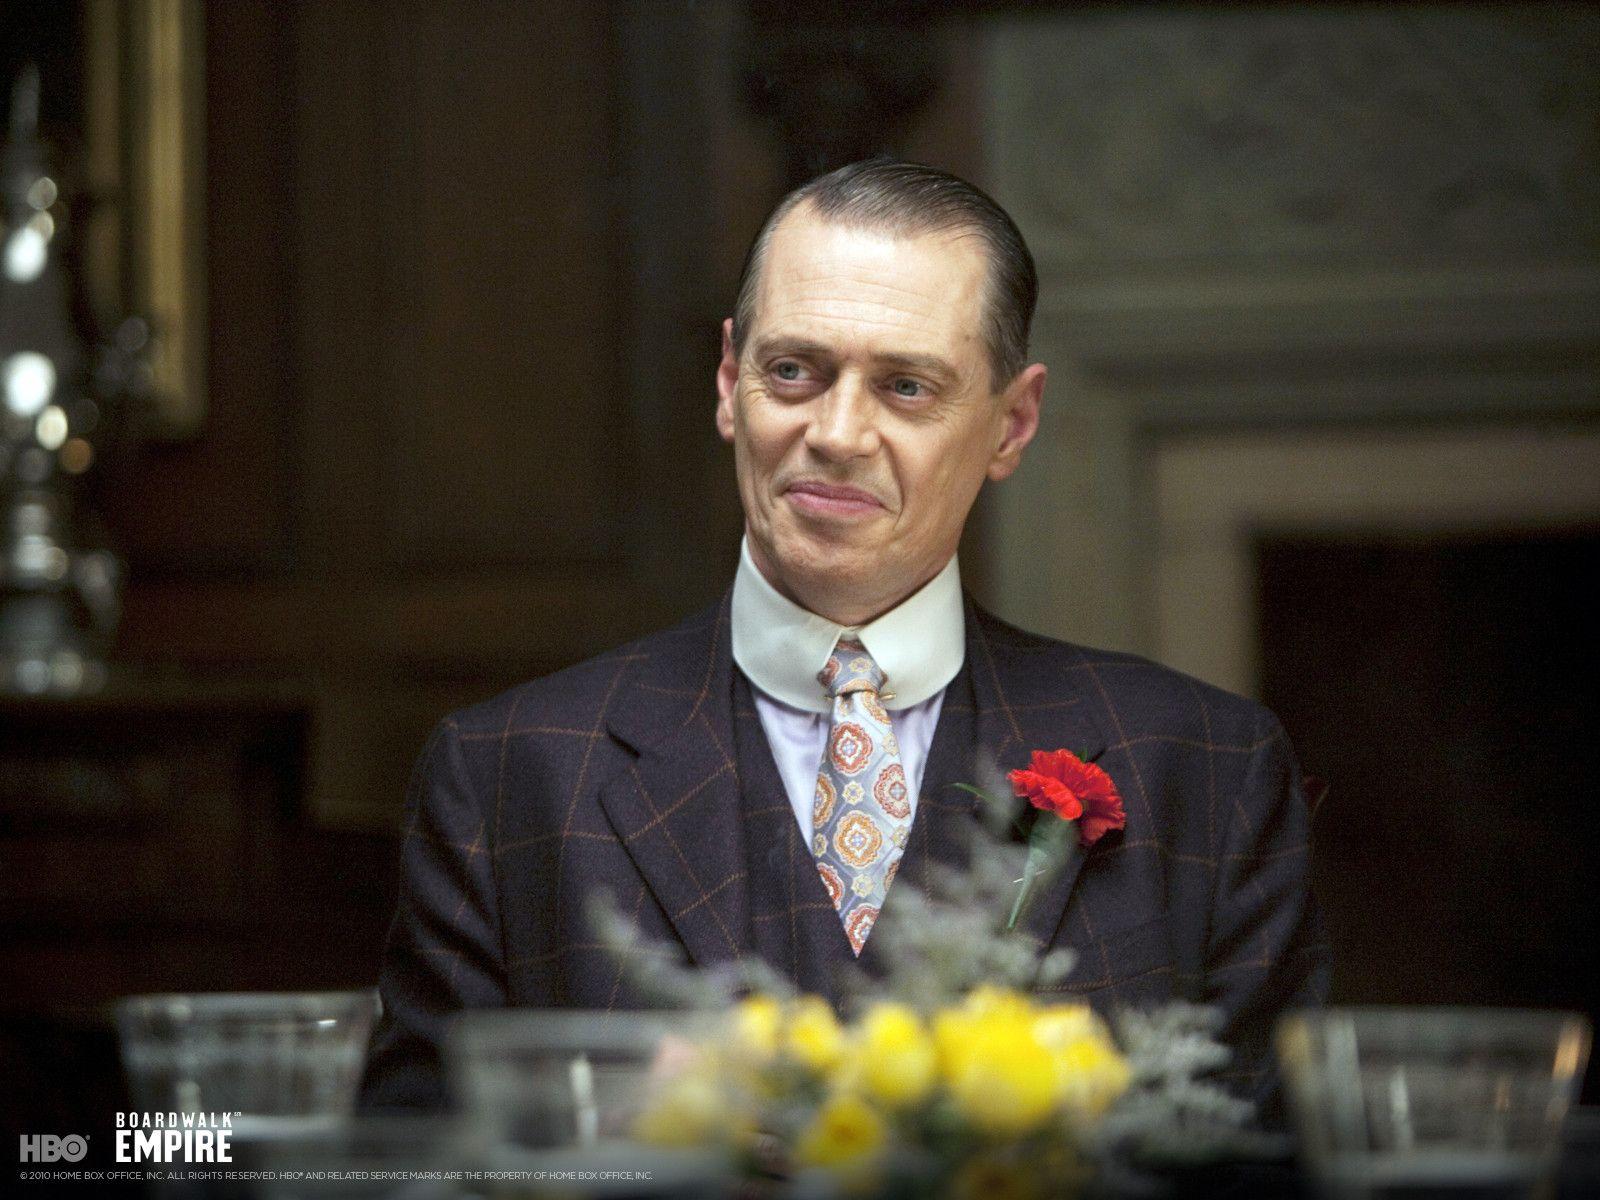 Boardwalk Empire Fact or Fiction: Rothstein, Luciano, Capone